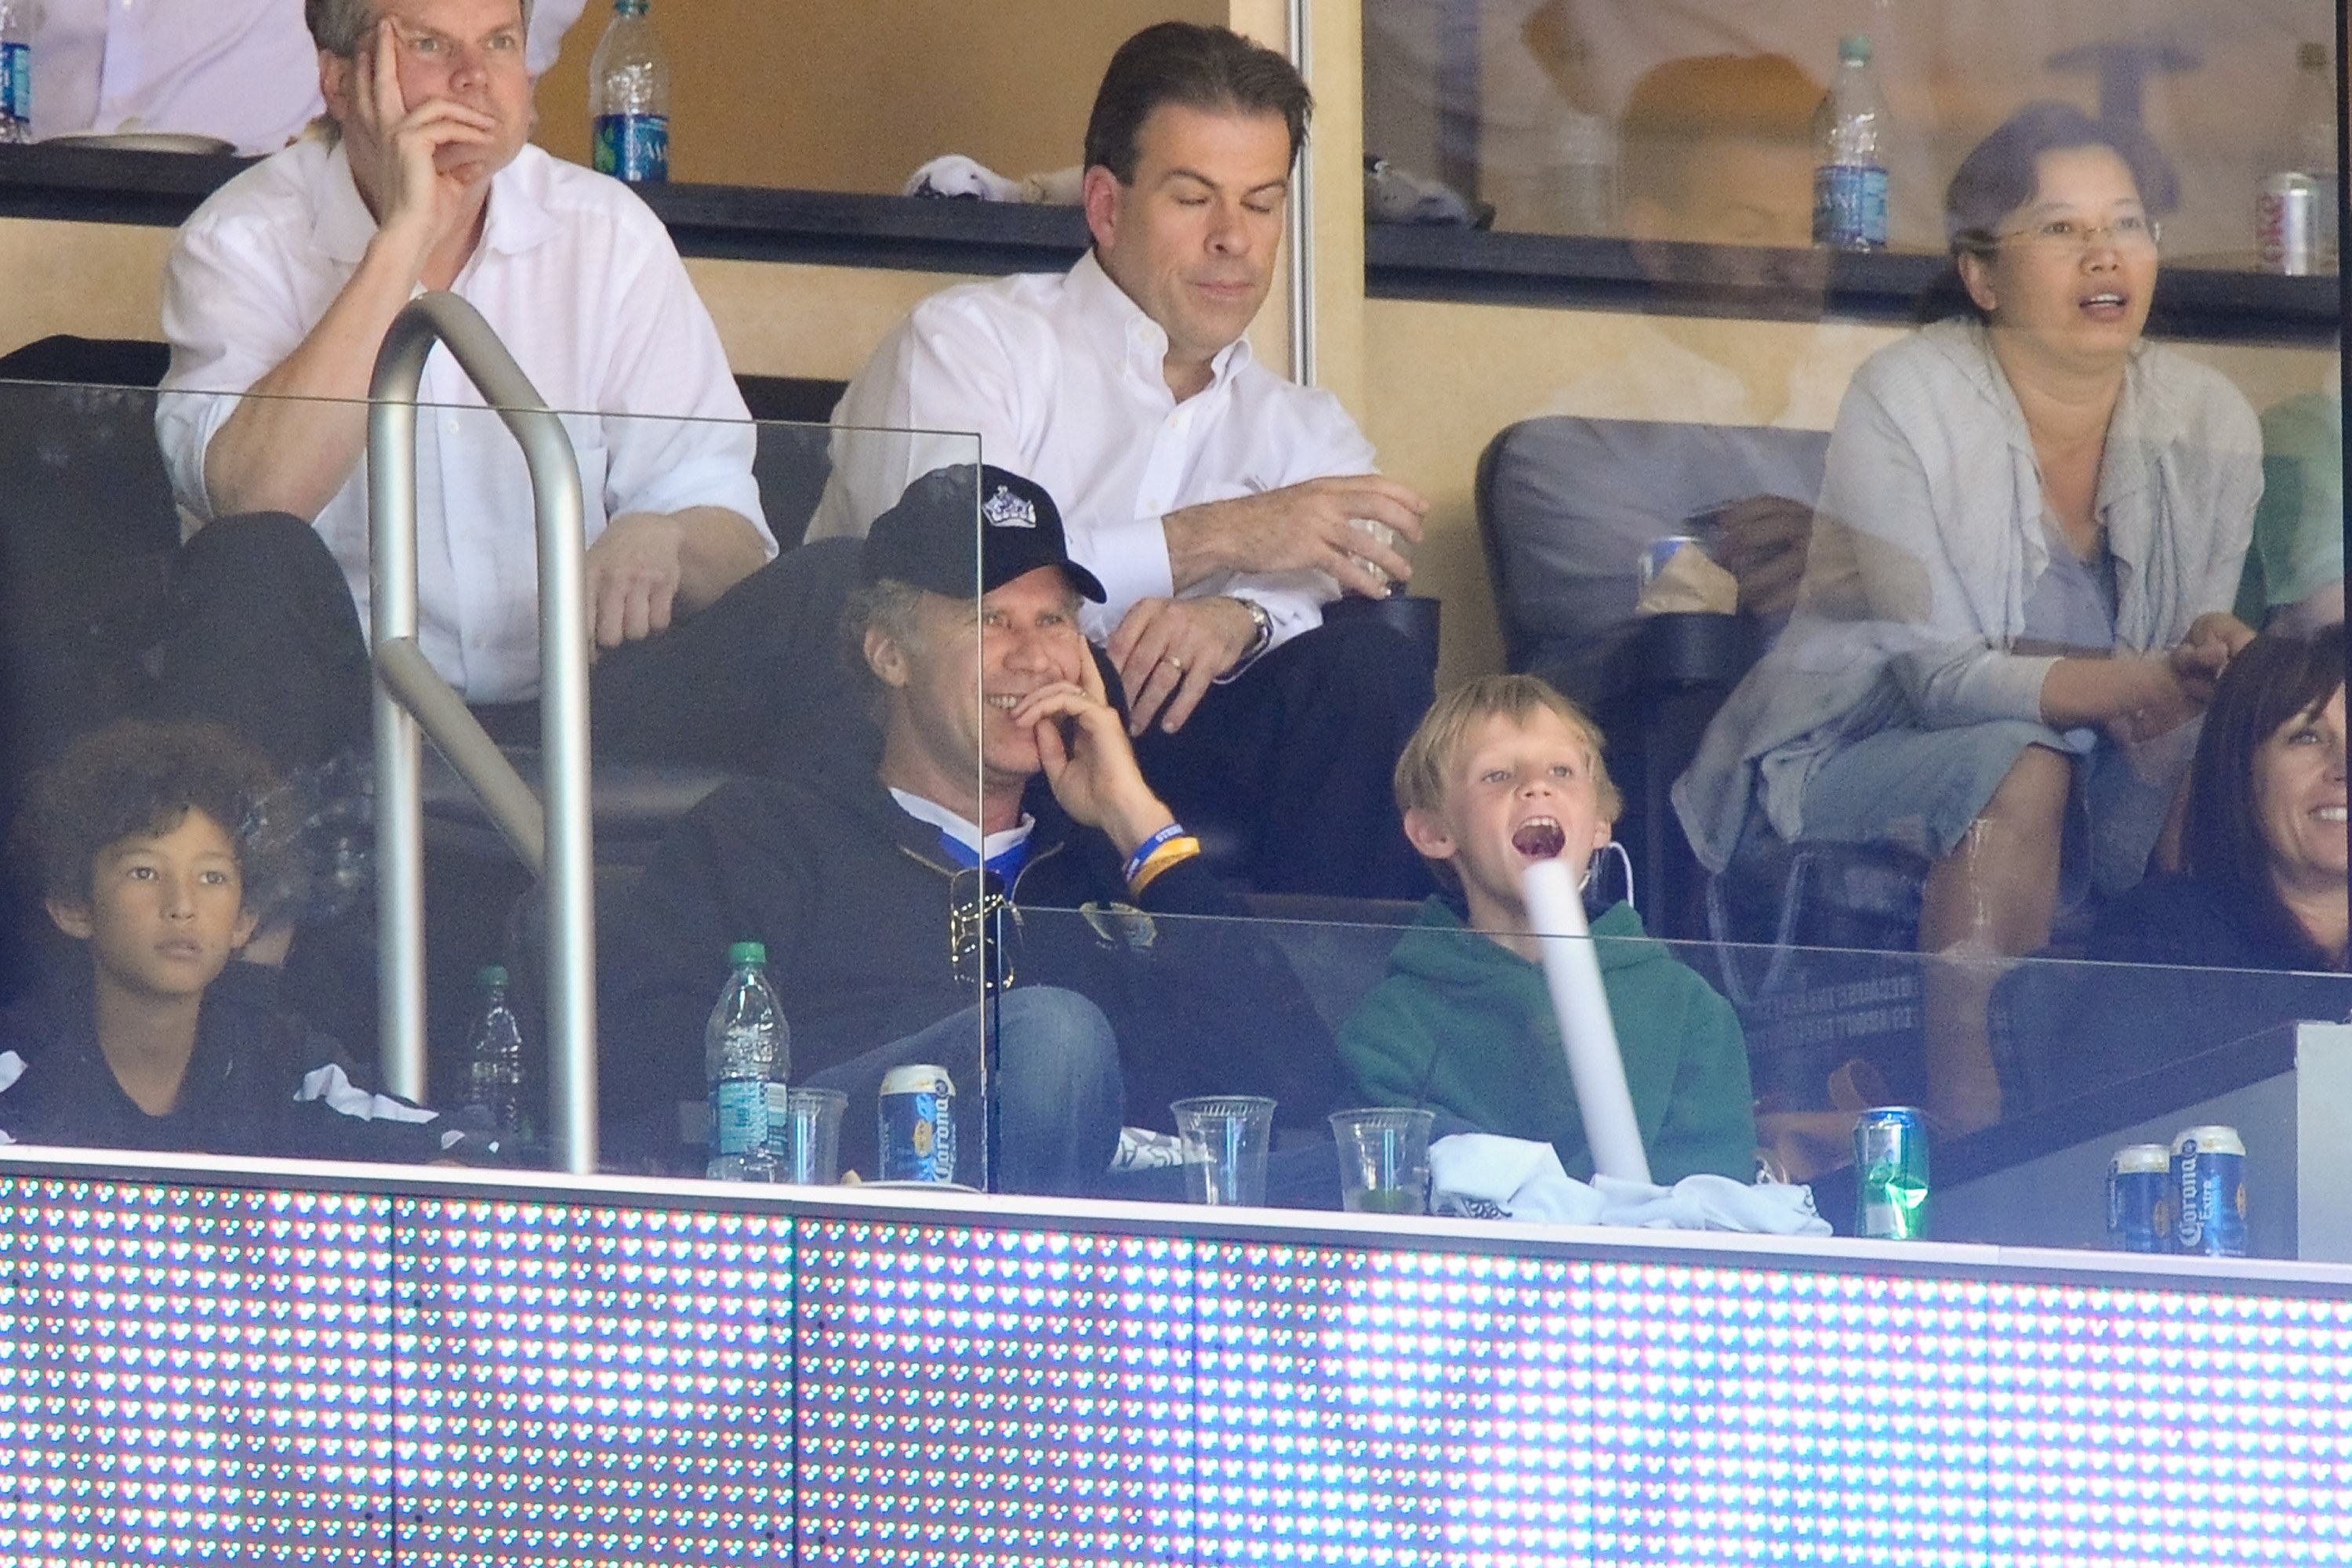 Will Ferrell (L) and his son Magnus Ferrell attend game three of the 2012 Stanley Cup Final between the Los Angeles Kings and the New Jersey Devils at Staples Center on June 4, 2012